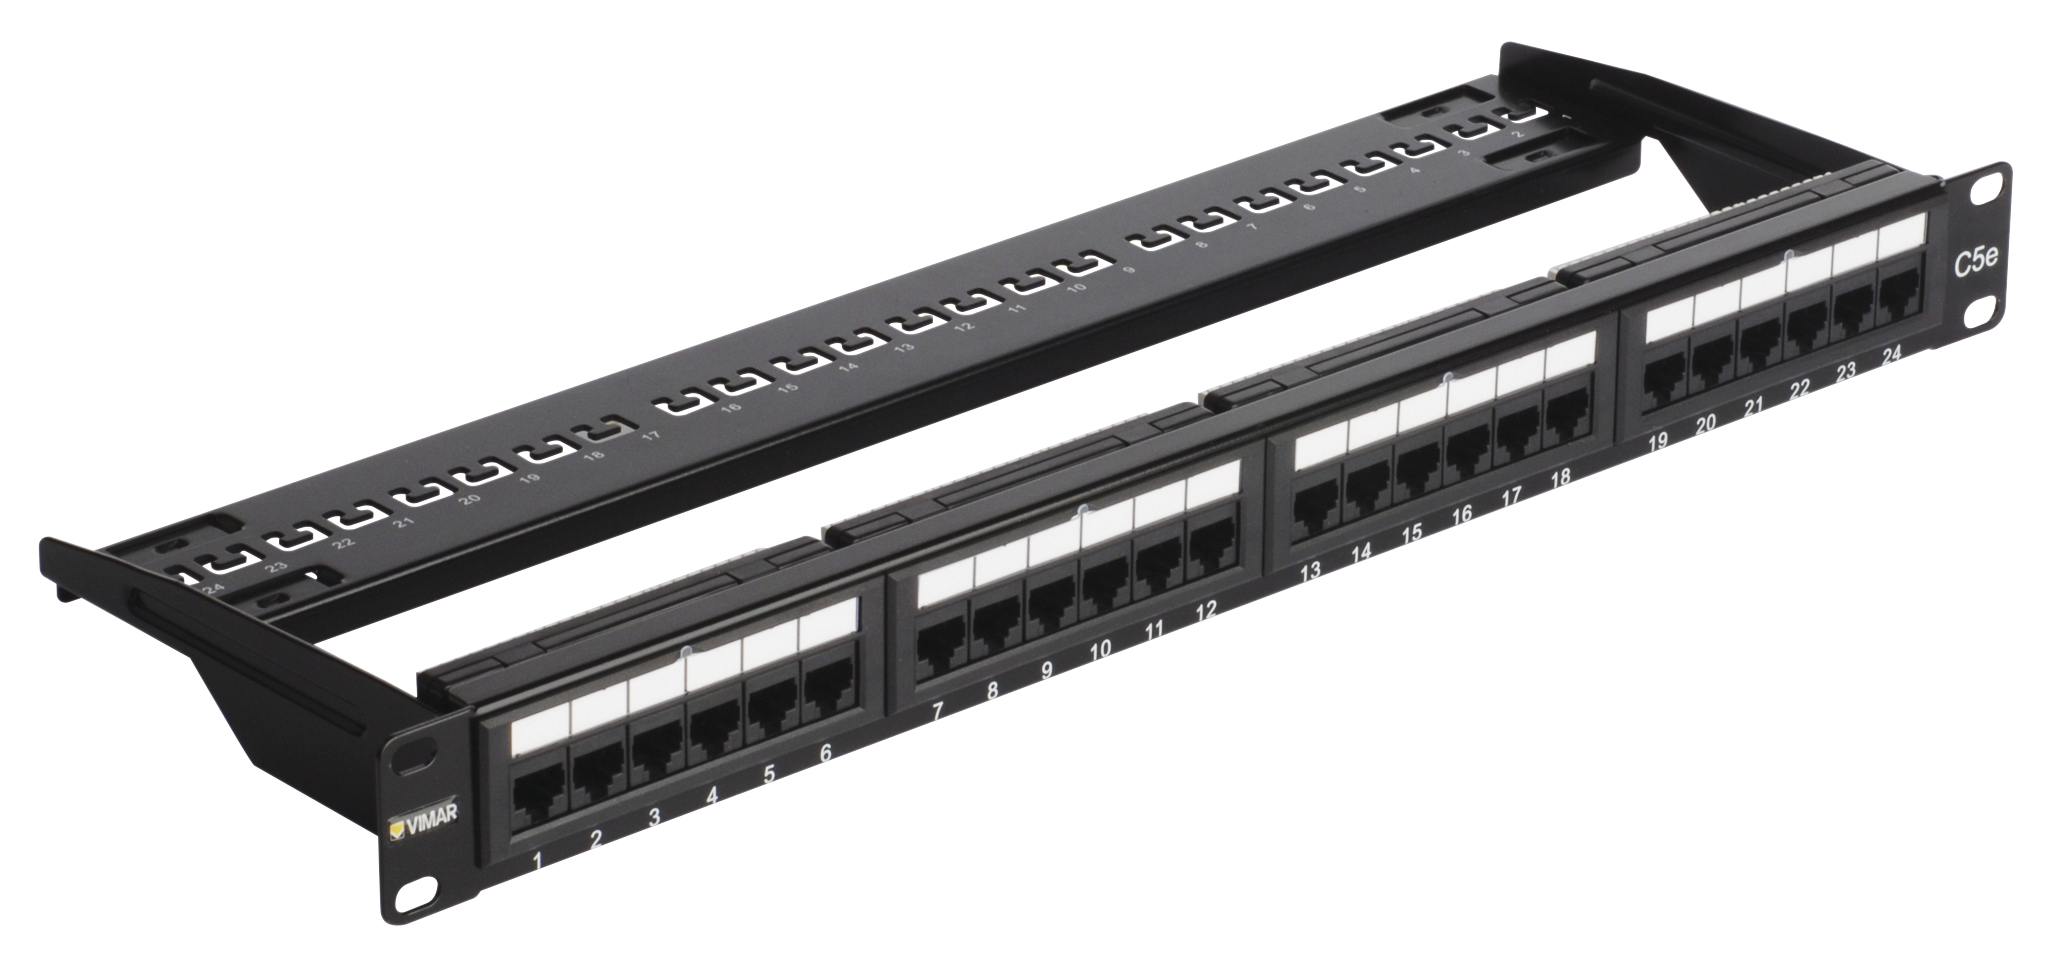 computer patch panel